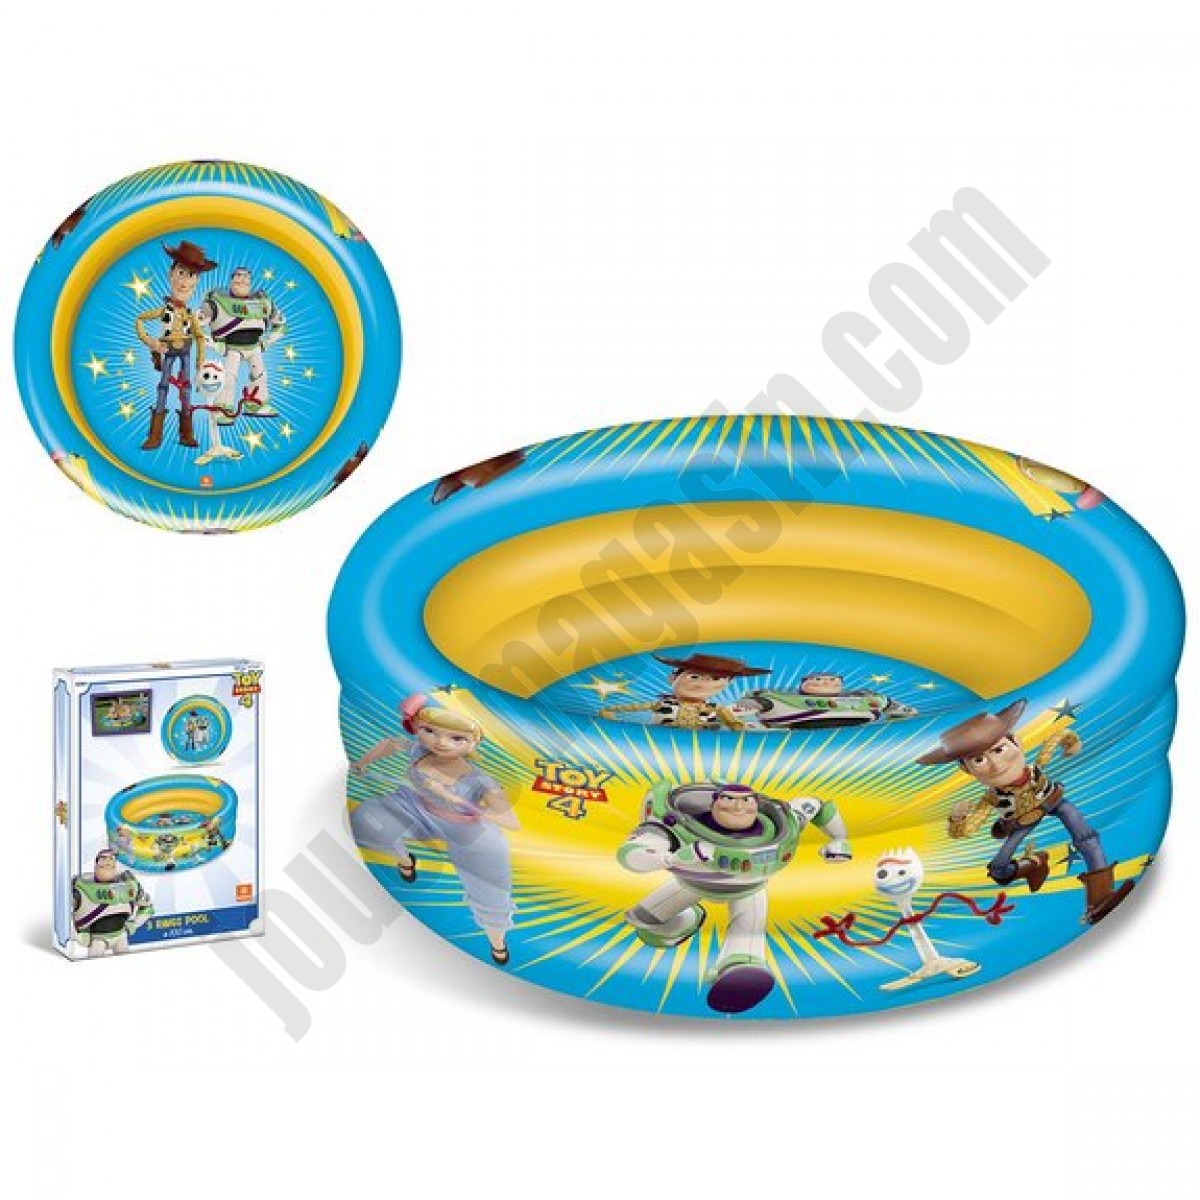 Piscine gonflable Toy Story - déstockage - Piscine gonflable Toy Story - déstockage